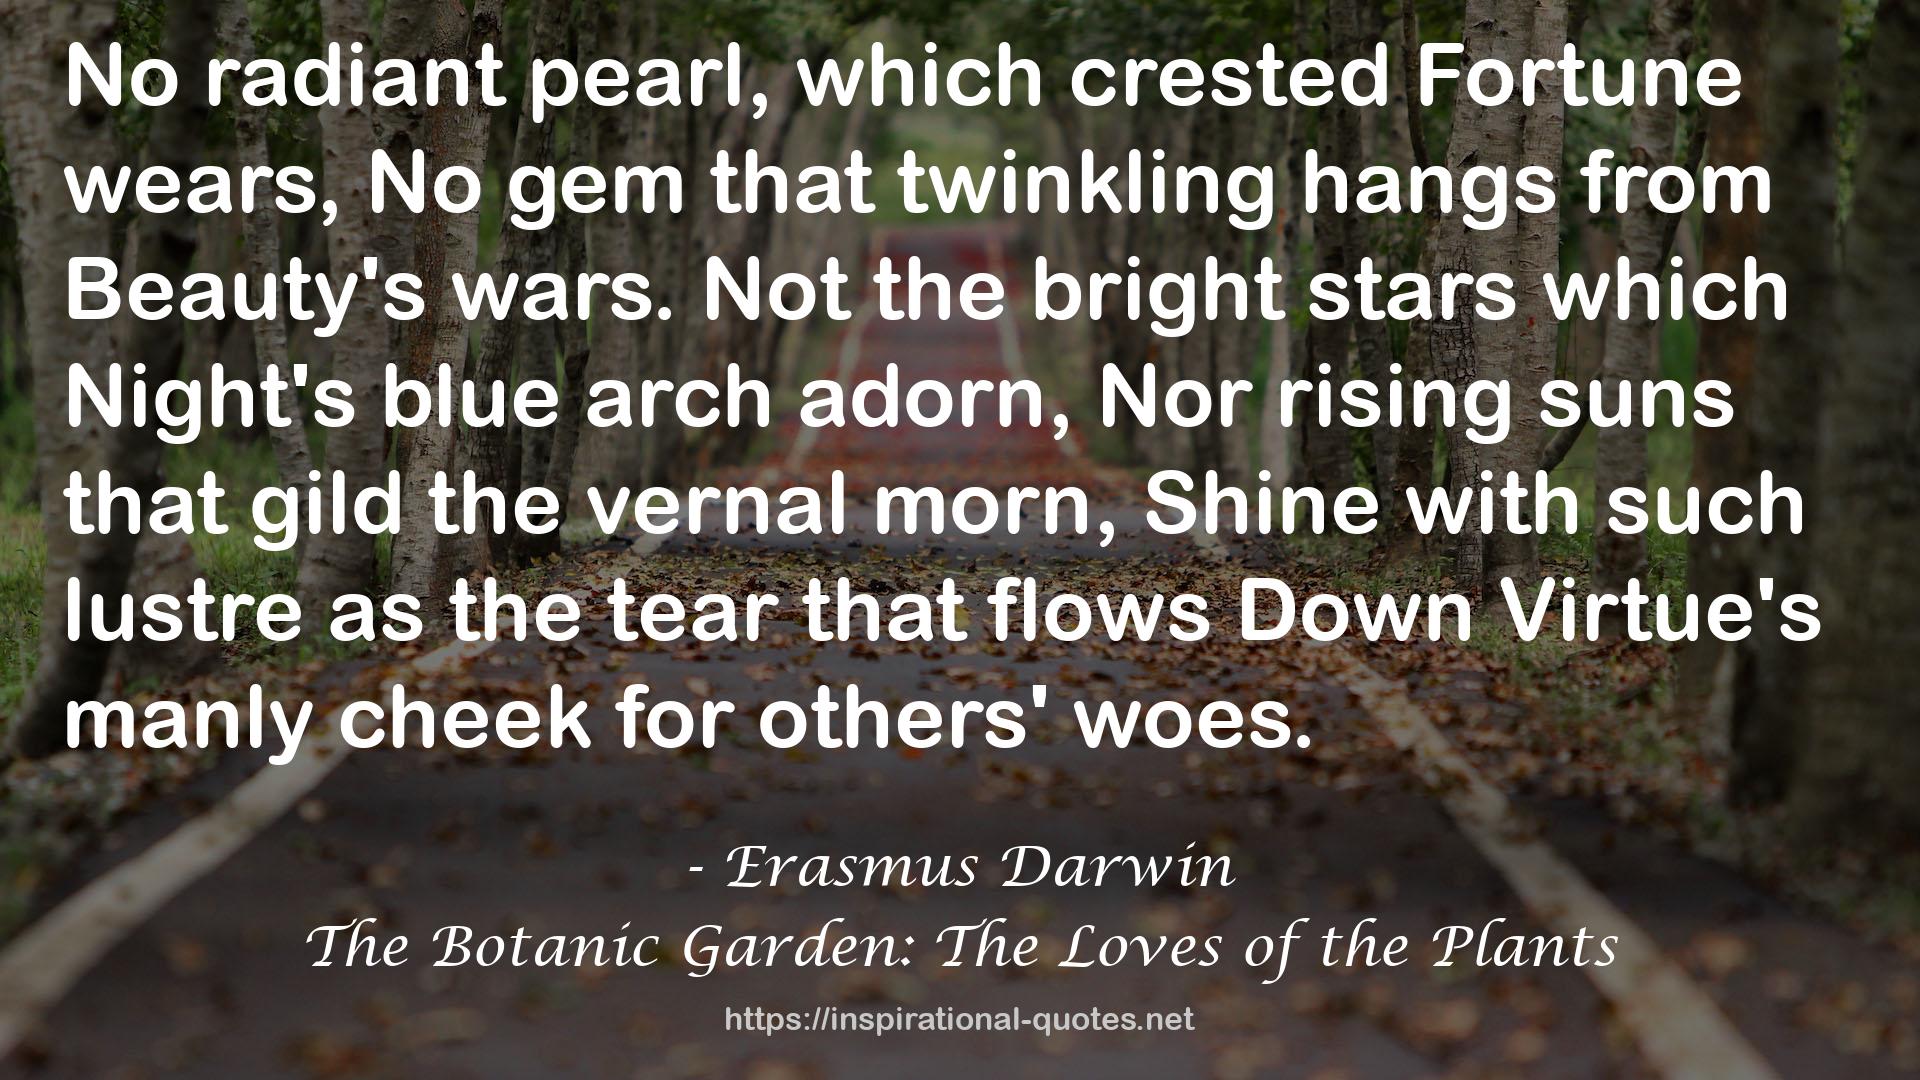 The Botanic Garden: The Loves of the Plants QUOTES